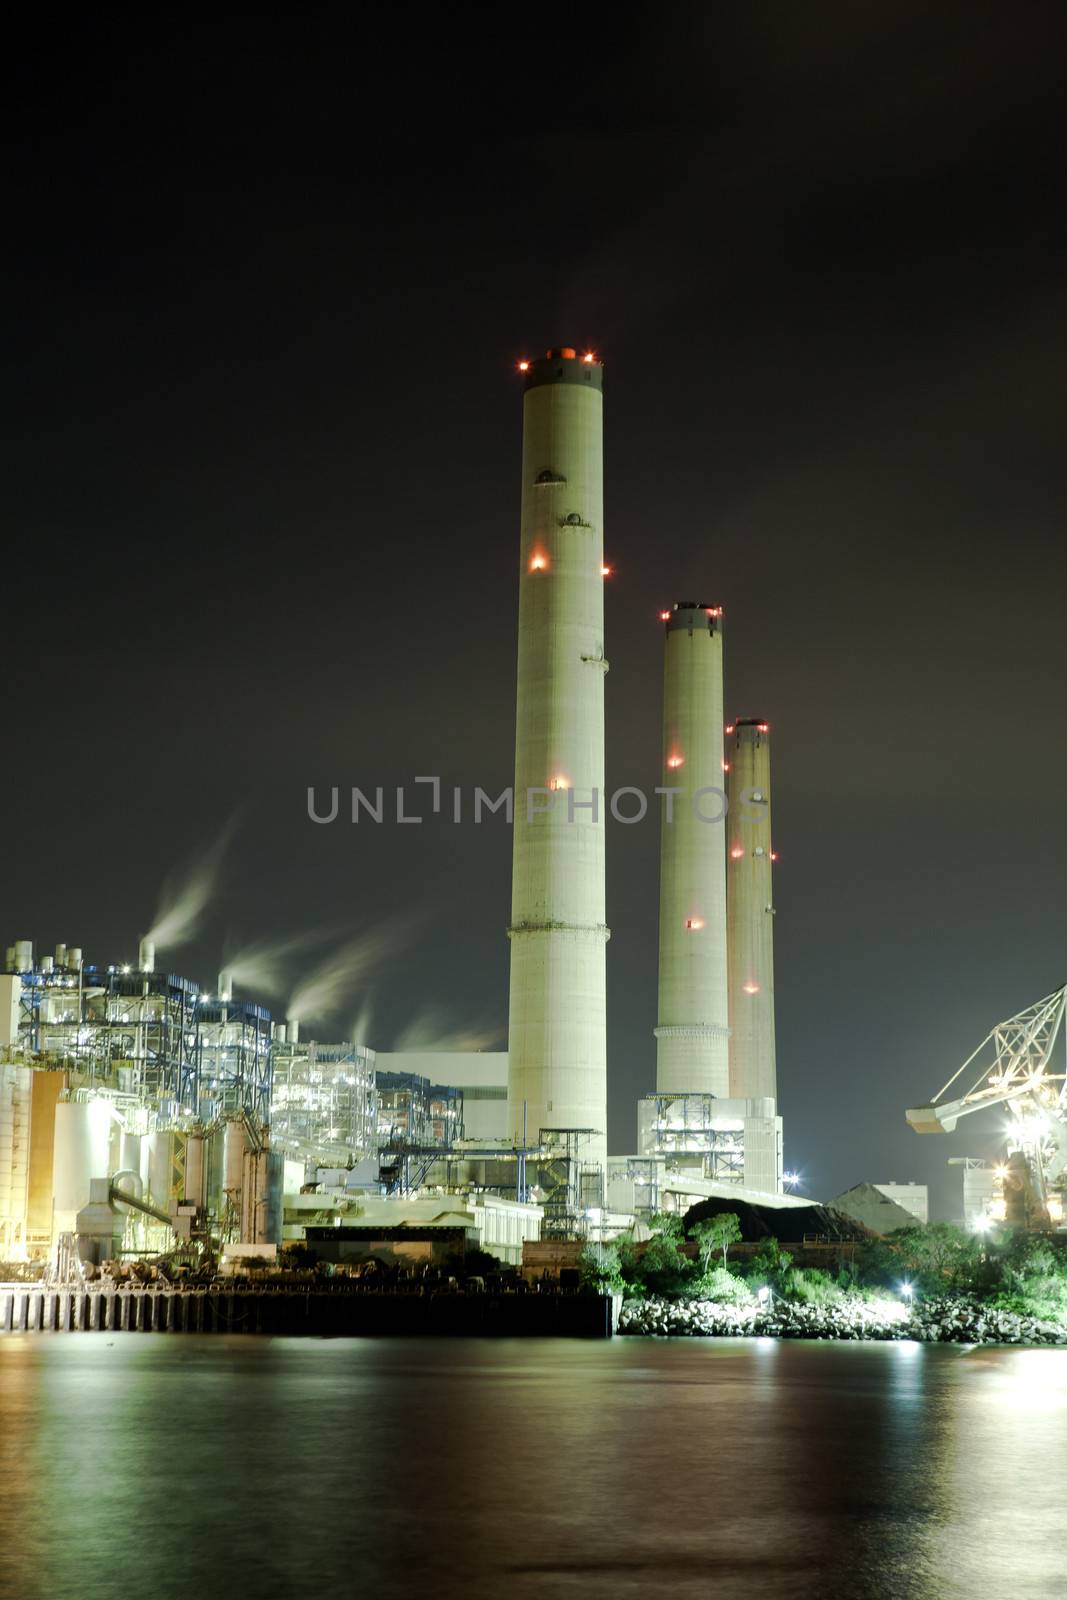 Gas plant at night by kawing921